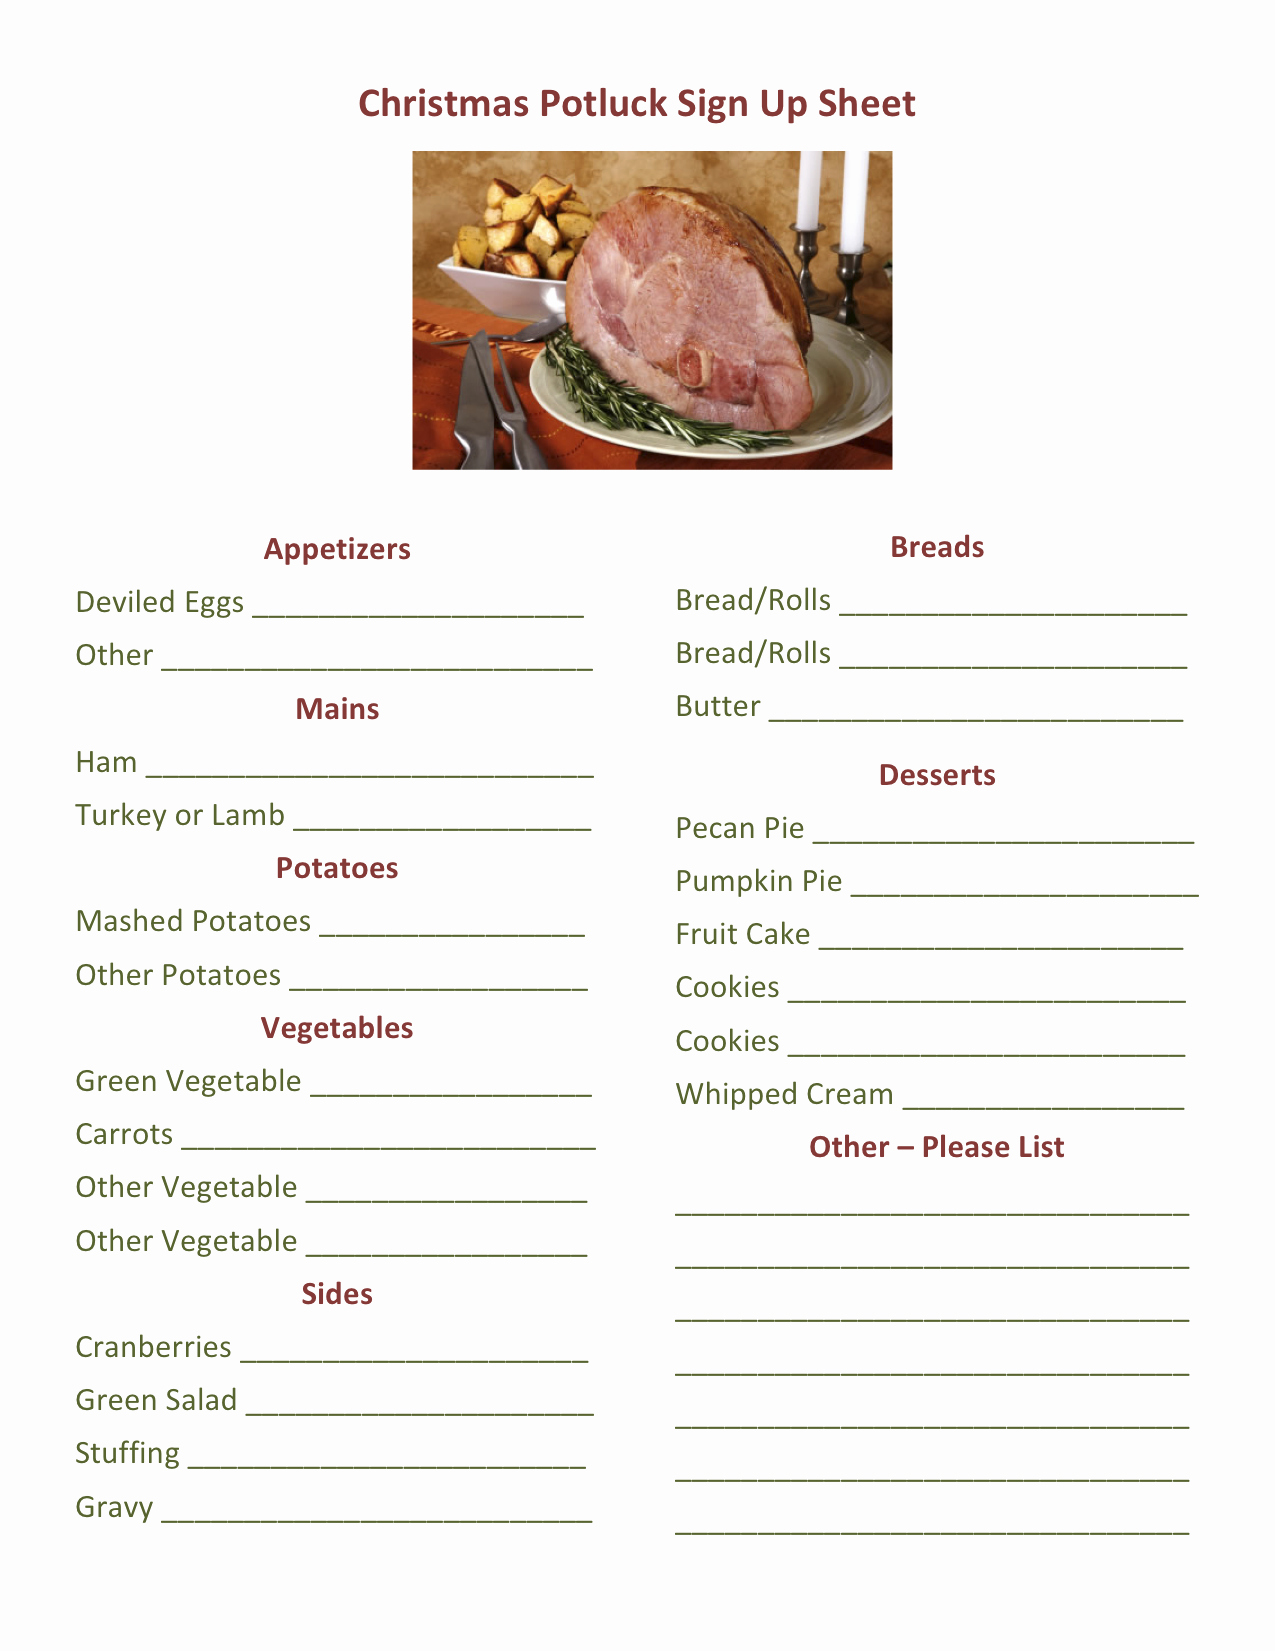 Thanksgiving Sign Up Sheet Printable Inspirational Thanksgiving Printable Potluck Sign Up Sheets – Happy